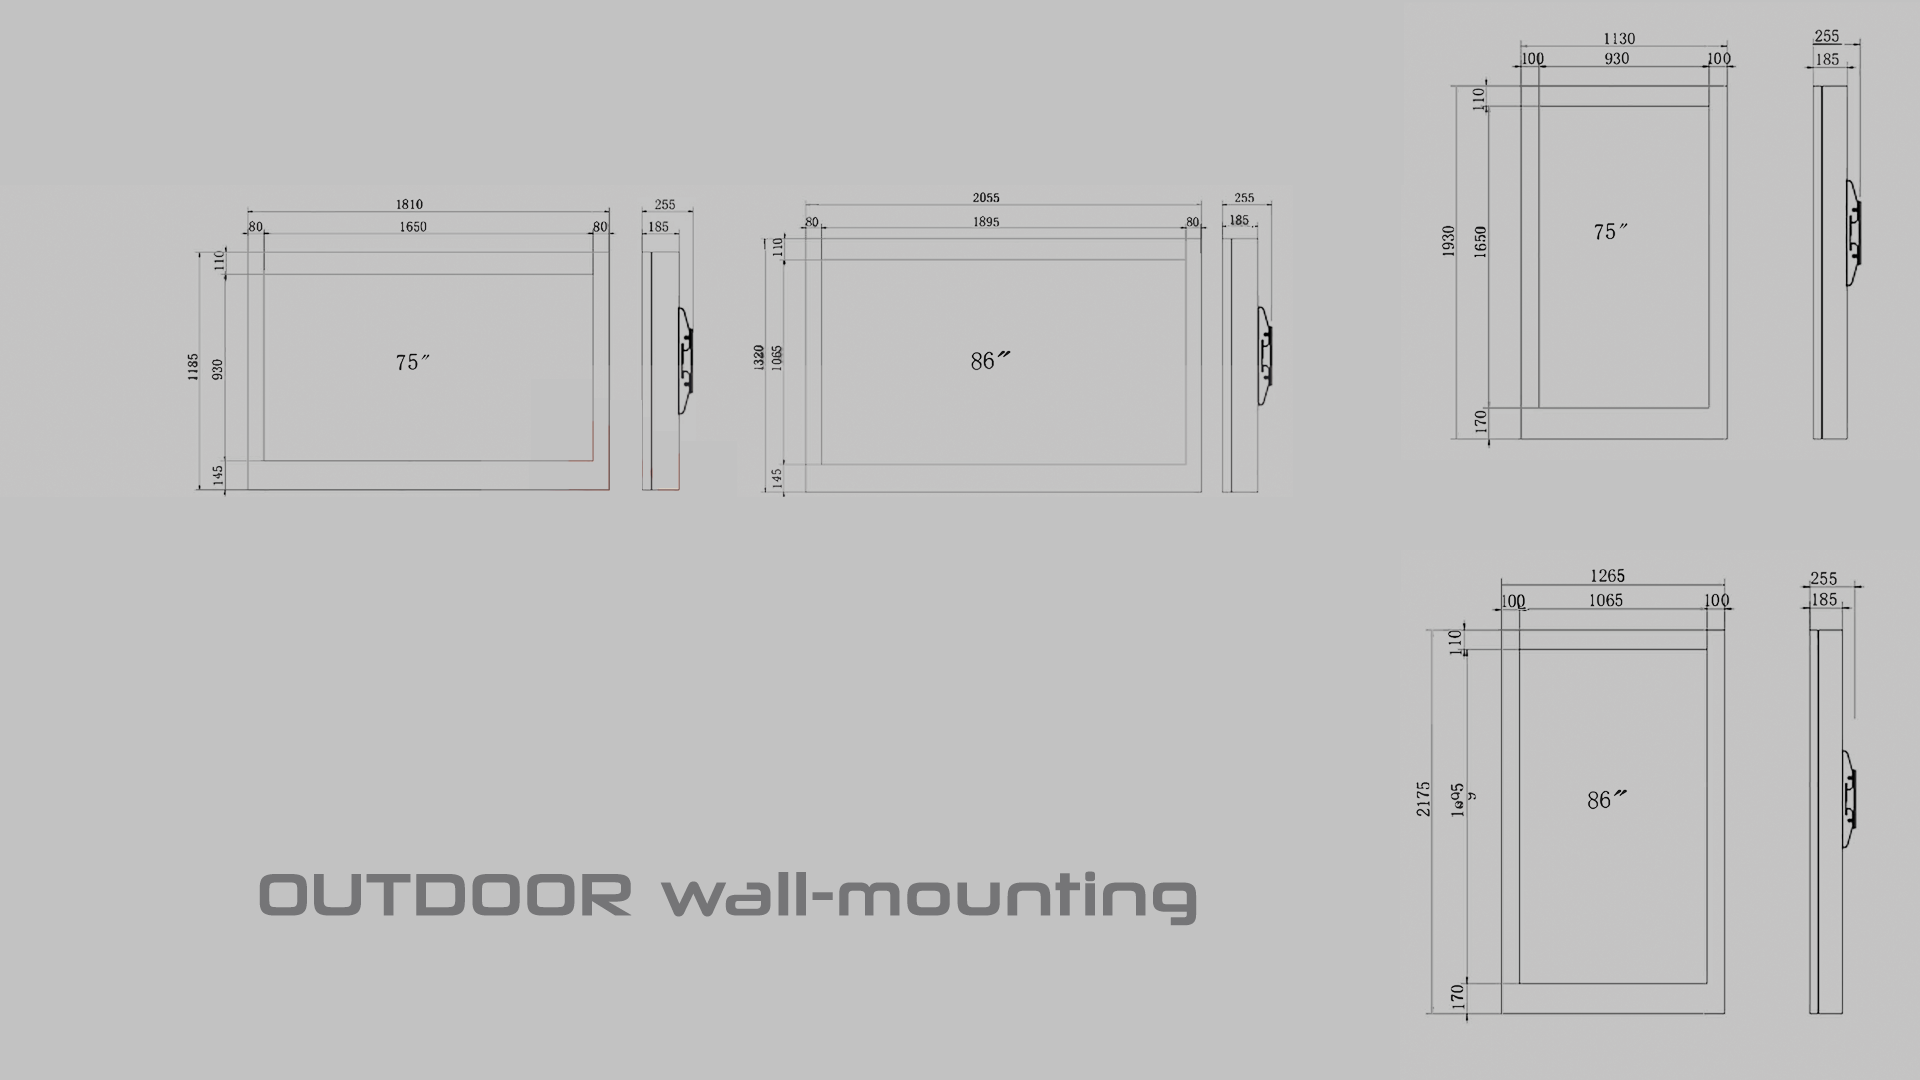 OUTDOOR wall-mounting